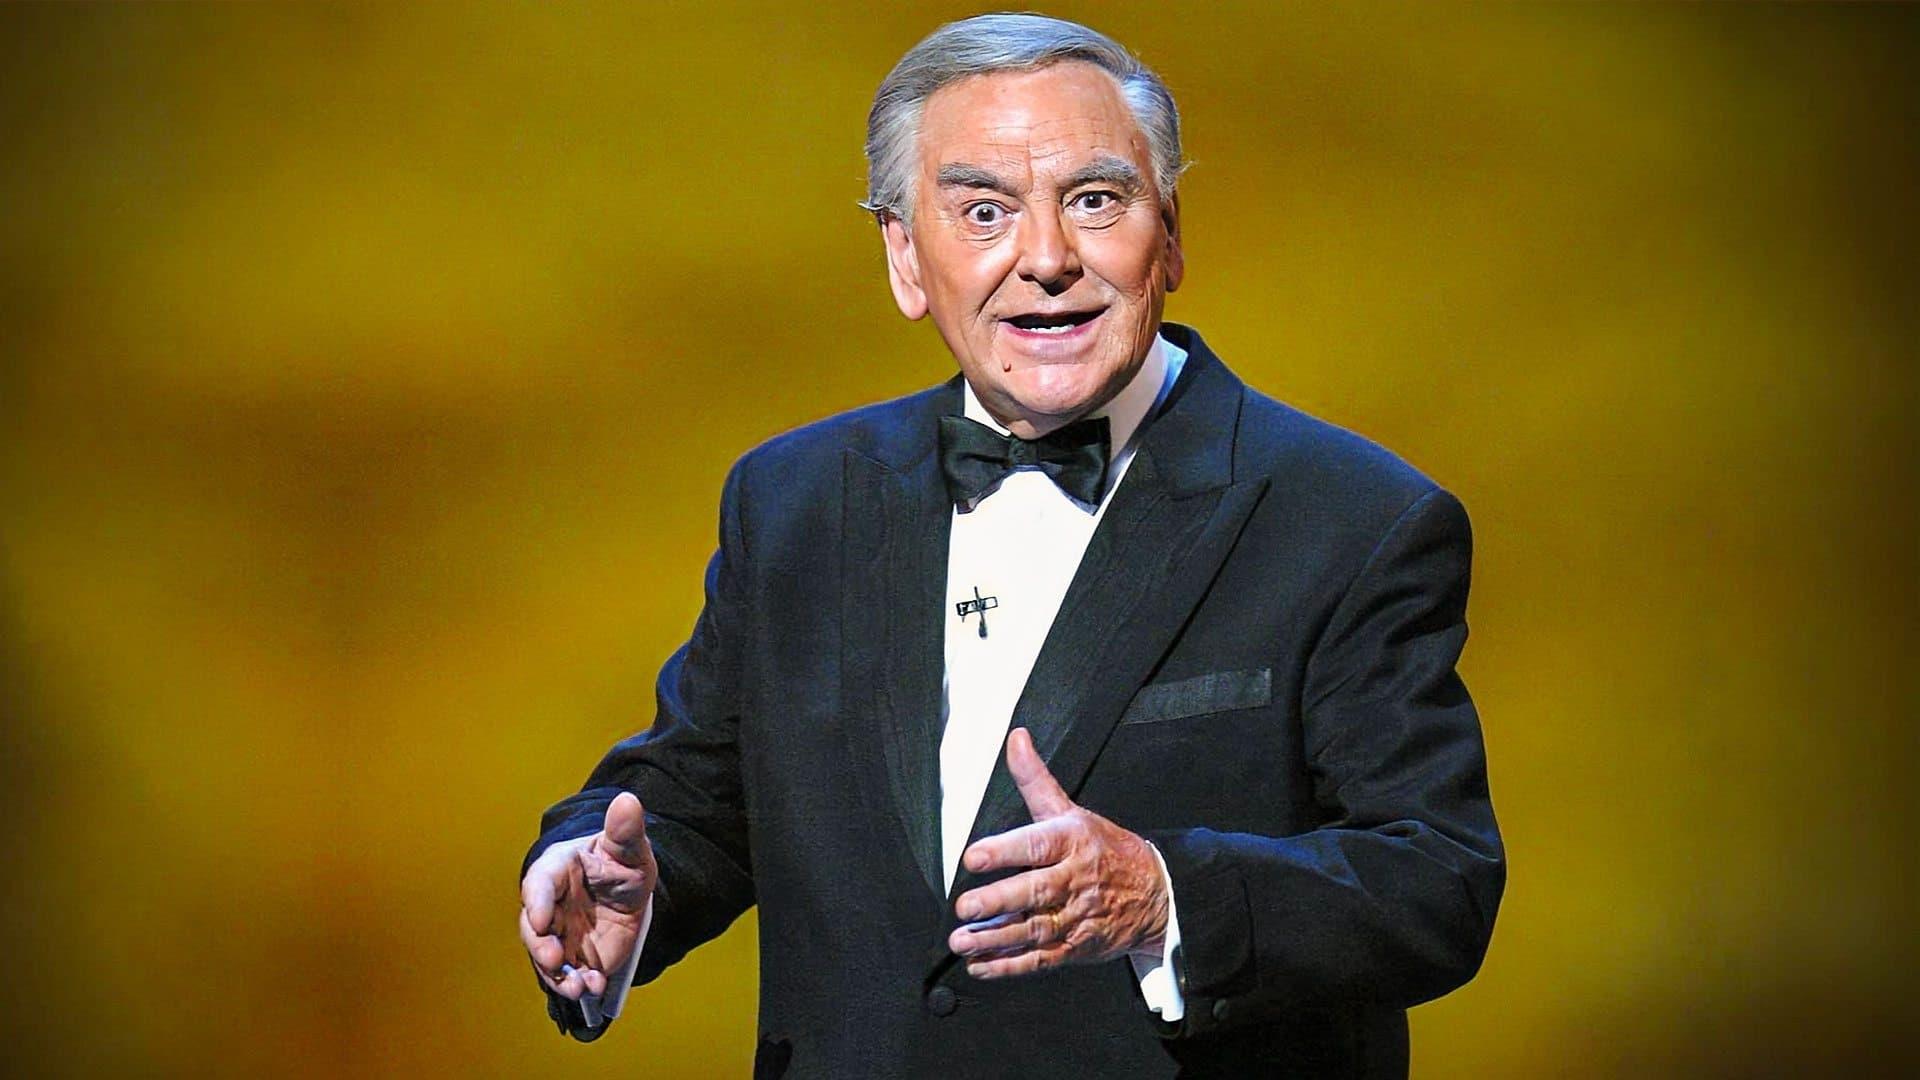 Bob Monkhouse: The Last Stand backdrop